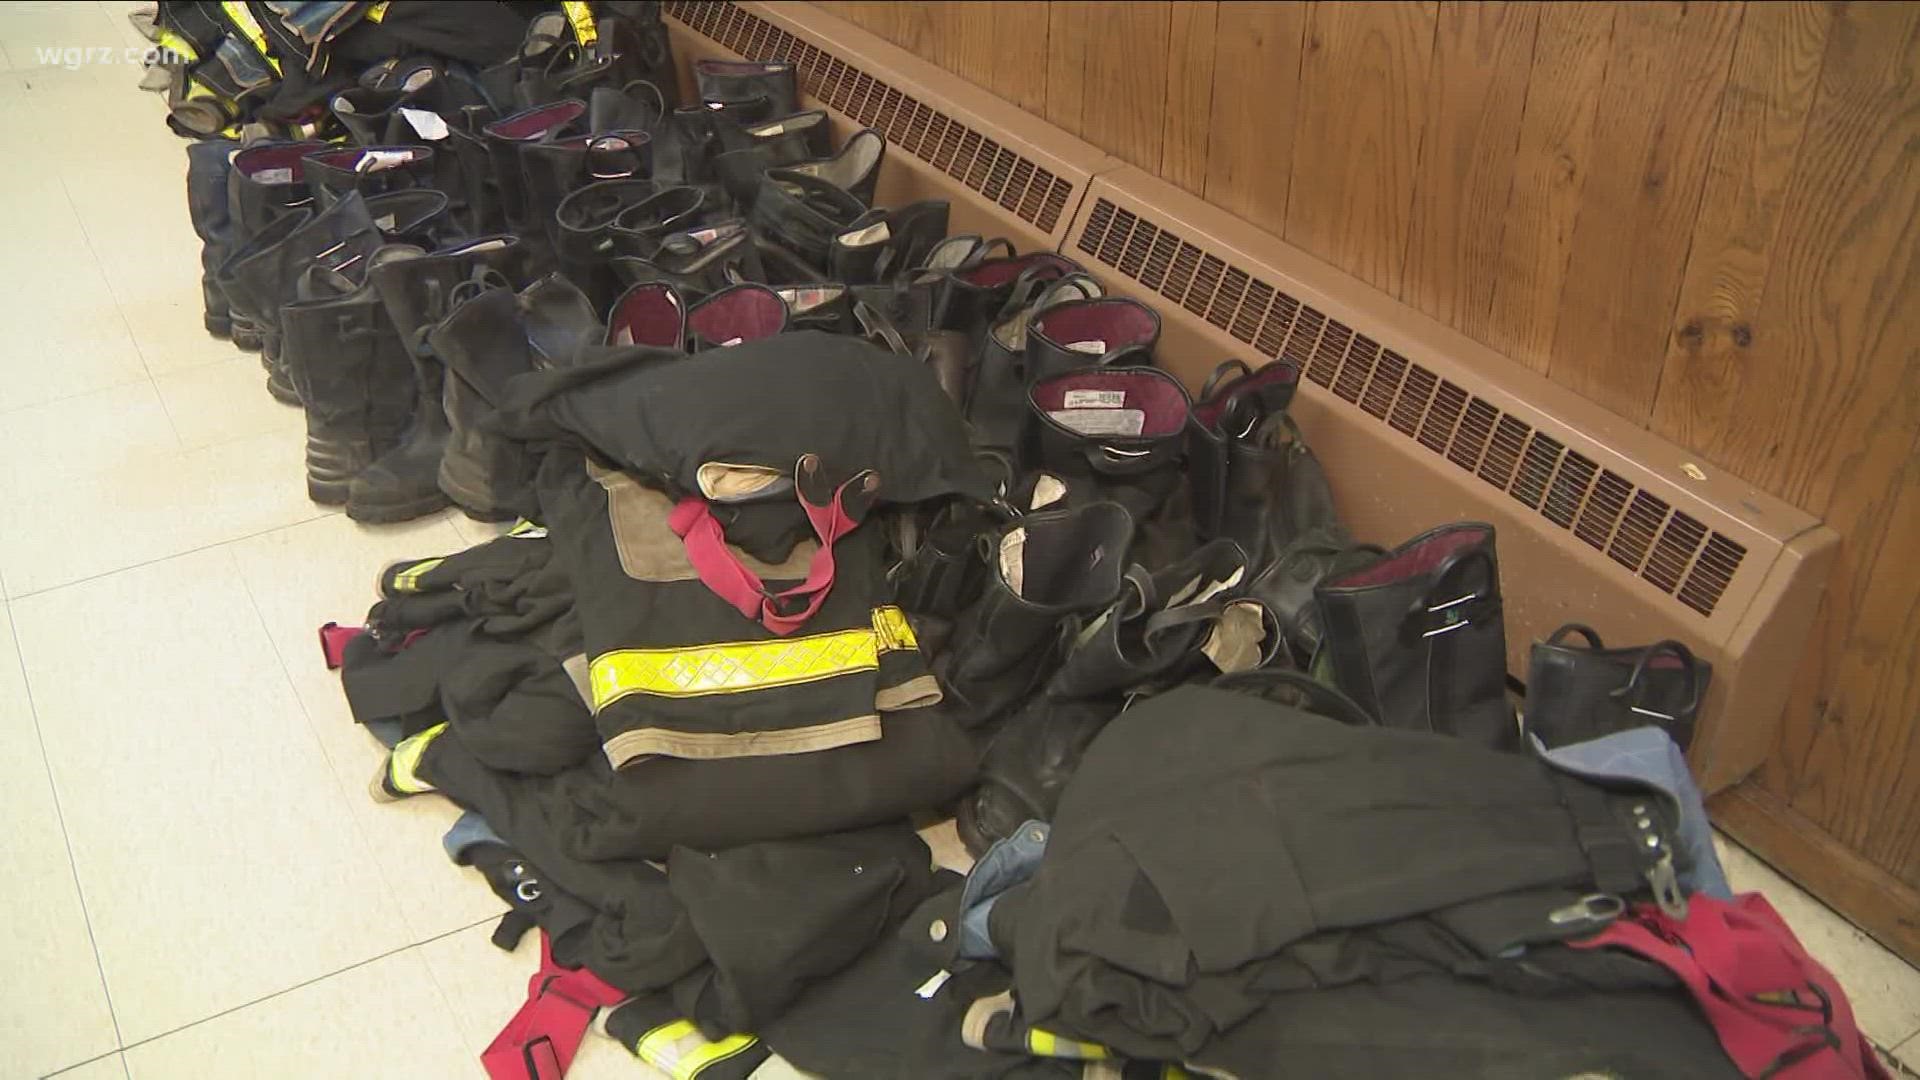 The company donated about 30 sets of fire gear to the Holy Trinity Ukrainian Orthodox Church that will send it off to first responders in Ukraine.